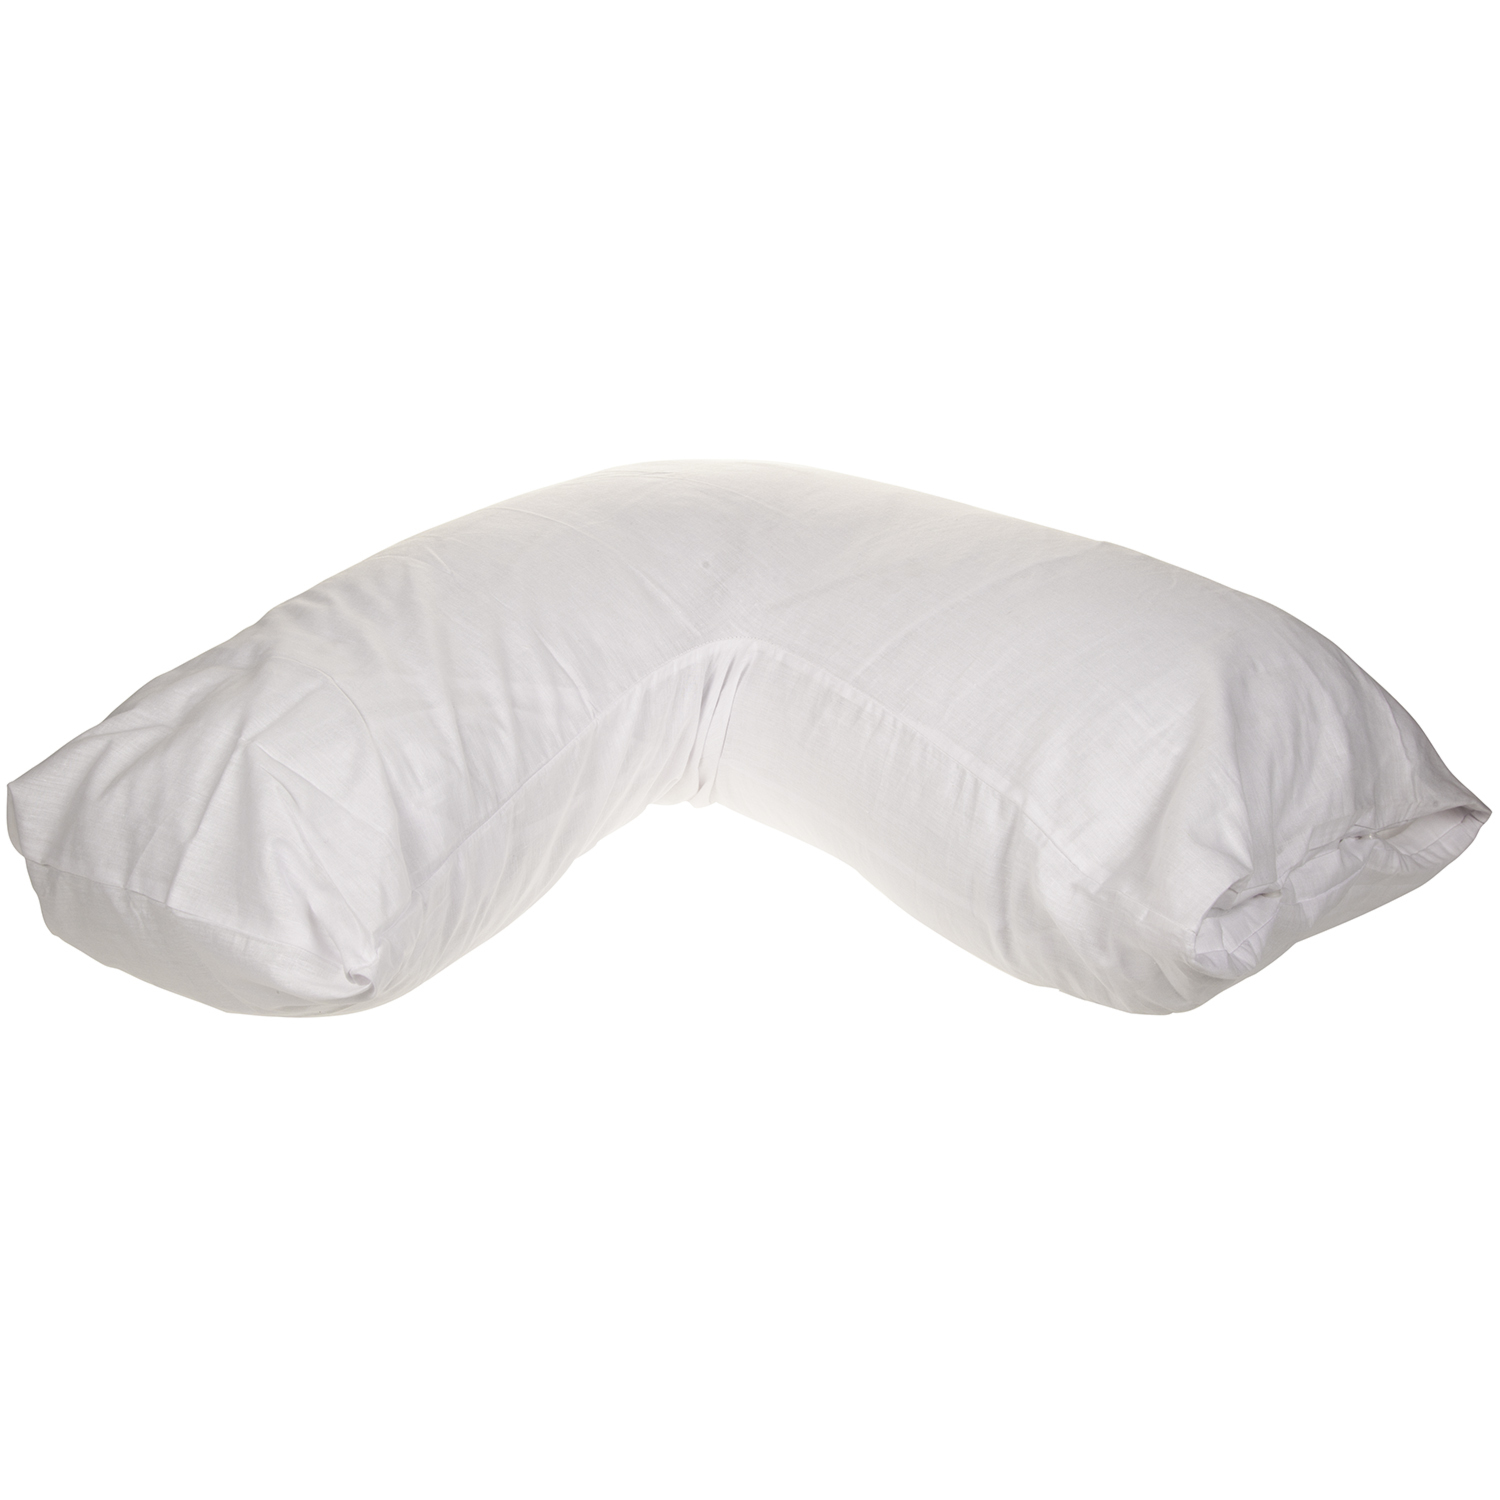 Easy Comfort White V Shape Pillow with Case Image 2